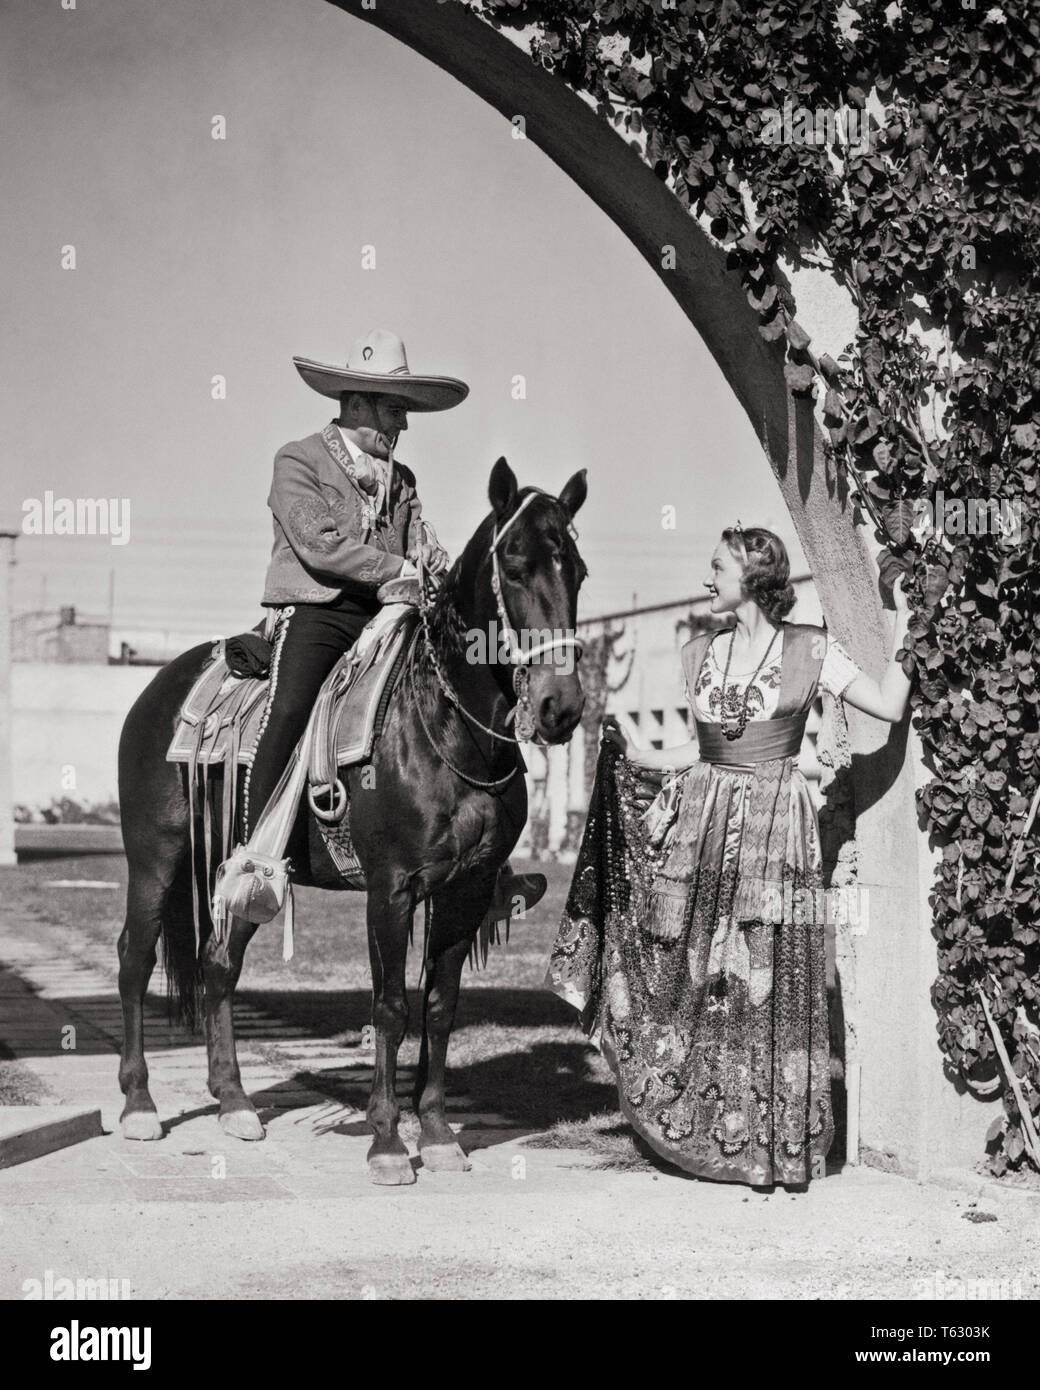 1930s SMILING CAUCASIAN WOMAN IN TRADITIONAL CHINA POBLANA COSTUME TALKING TO MEXICAN MAN HORSEACK WEARING CHARRO COWBOY CLOTHES - r11452 HAR001 HARS LIFESTYLE HISTORY FEMALES RURAL COPY SPACE FRIENDSHIP FULL-LENGTH LADIES PERSONS TRADITIONAL MALES TRANSPORTATION MEXICAN B&W NORTH AMERICA MEXICO ADVENTURE STYLES LATIN AMERICAN STYLISH FASHIONS MID-ADULT MID-ADULT MAN YOUNG ADULT WOMAN BLACK AND WHITE CAUCASIAN ETHNICITY CHARRO CHINA POBLANA HAR001 HISPANIC ETHNICITY OLD FASHIONED TOURISM Stock Photo